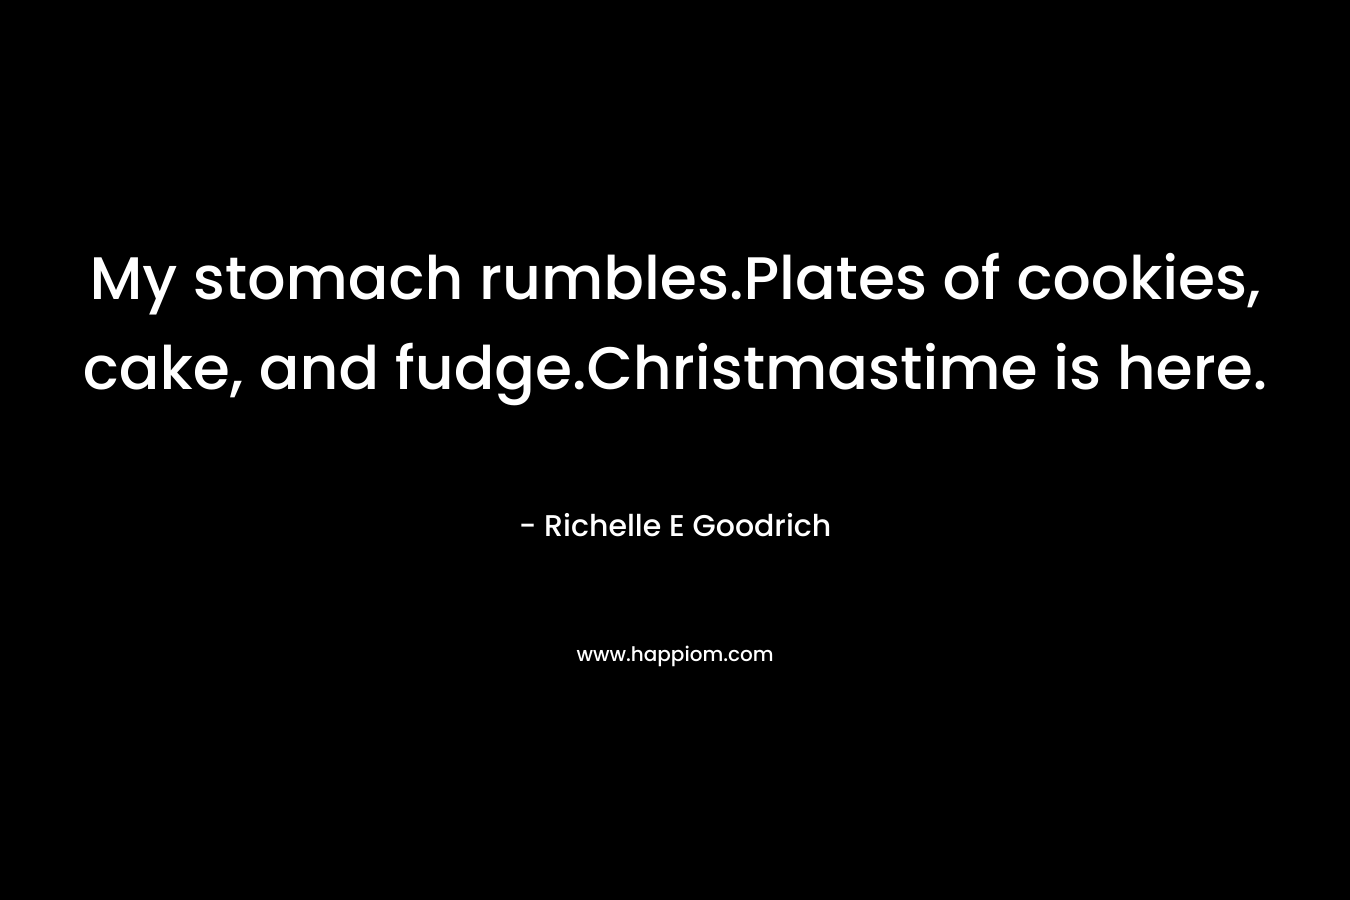 My stomach rumbles.Plates of cookies, cake, and fudge.Christmastime is here. – Richelle E Goodrich